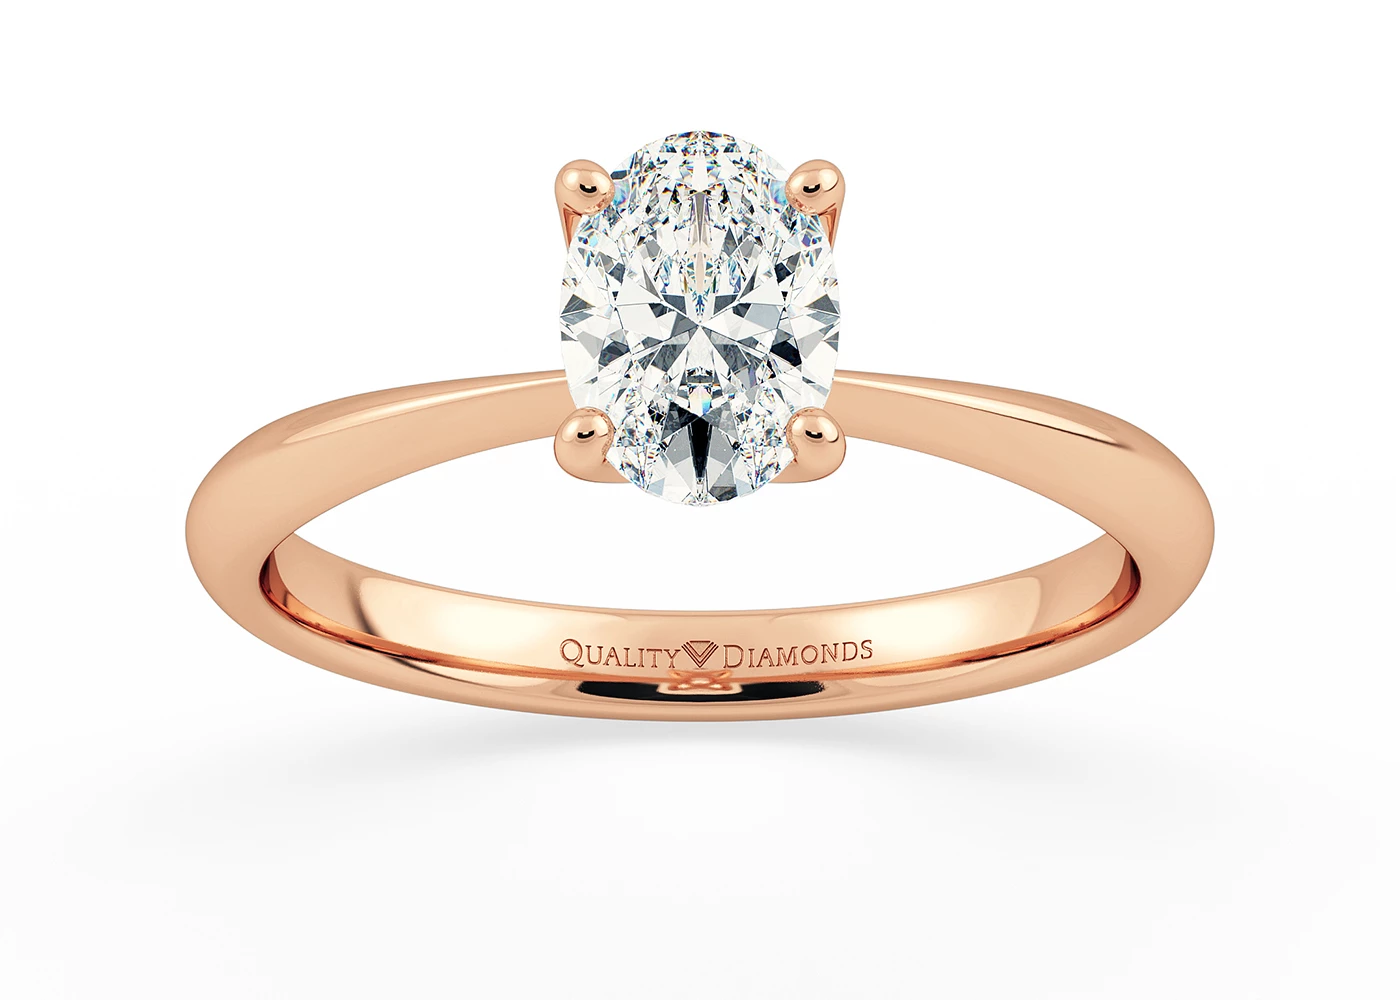 Two Carat Oval Solitaire Diamond Engagement Ring in 18K Rose Gold